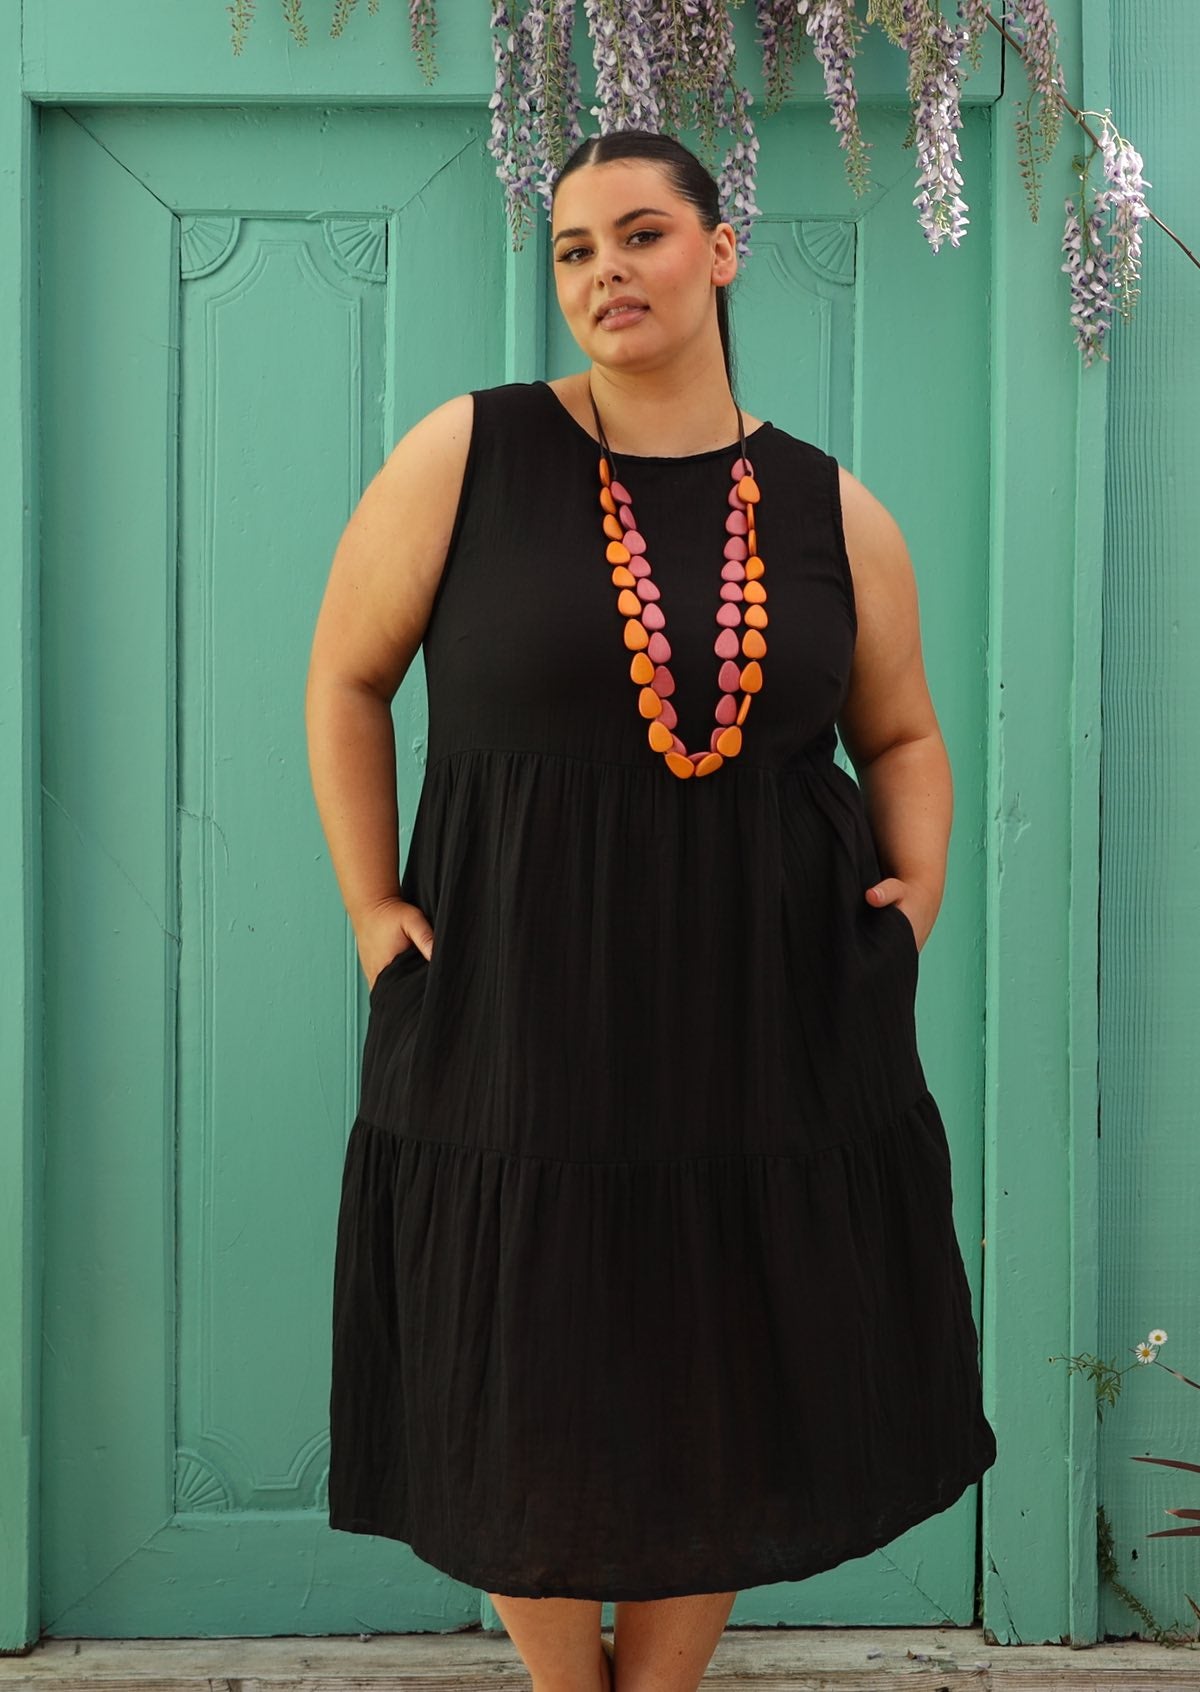 Plus sized woman wearing below knee cotton black dress with bright beads